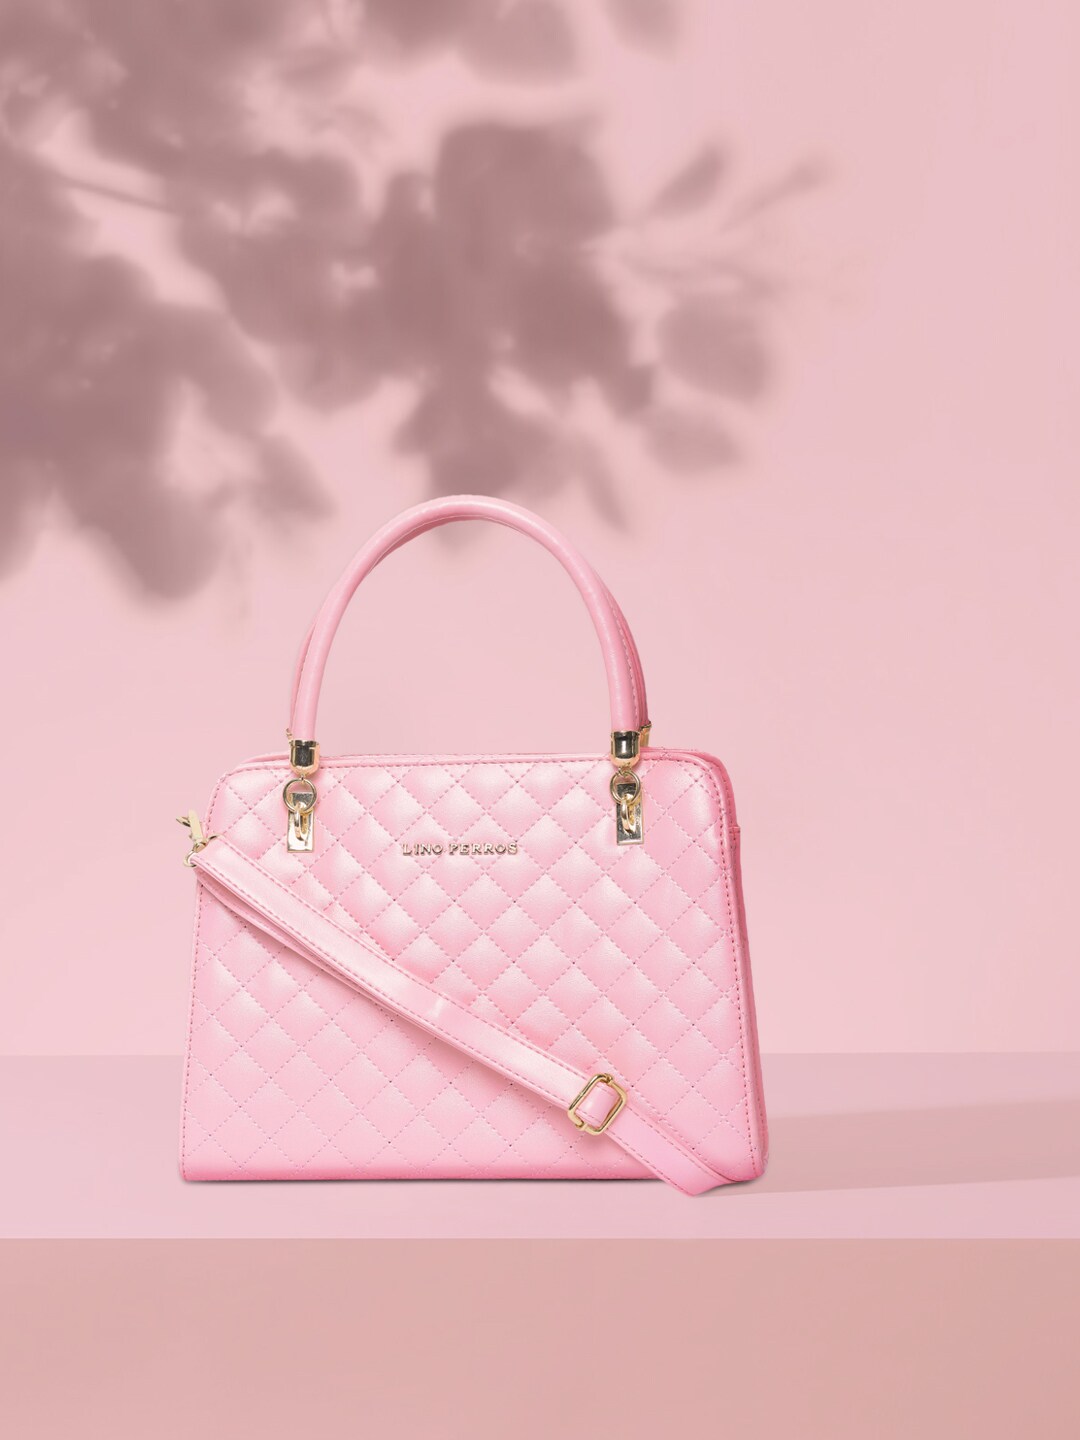 Lino Perros Pink Quilted Handheld Bag Price in India